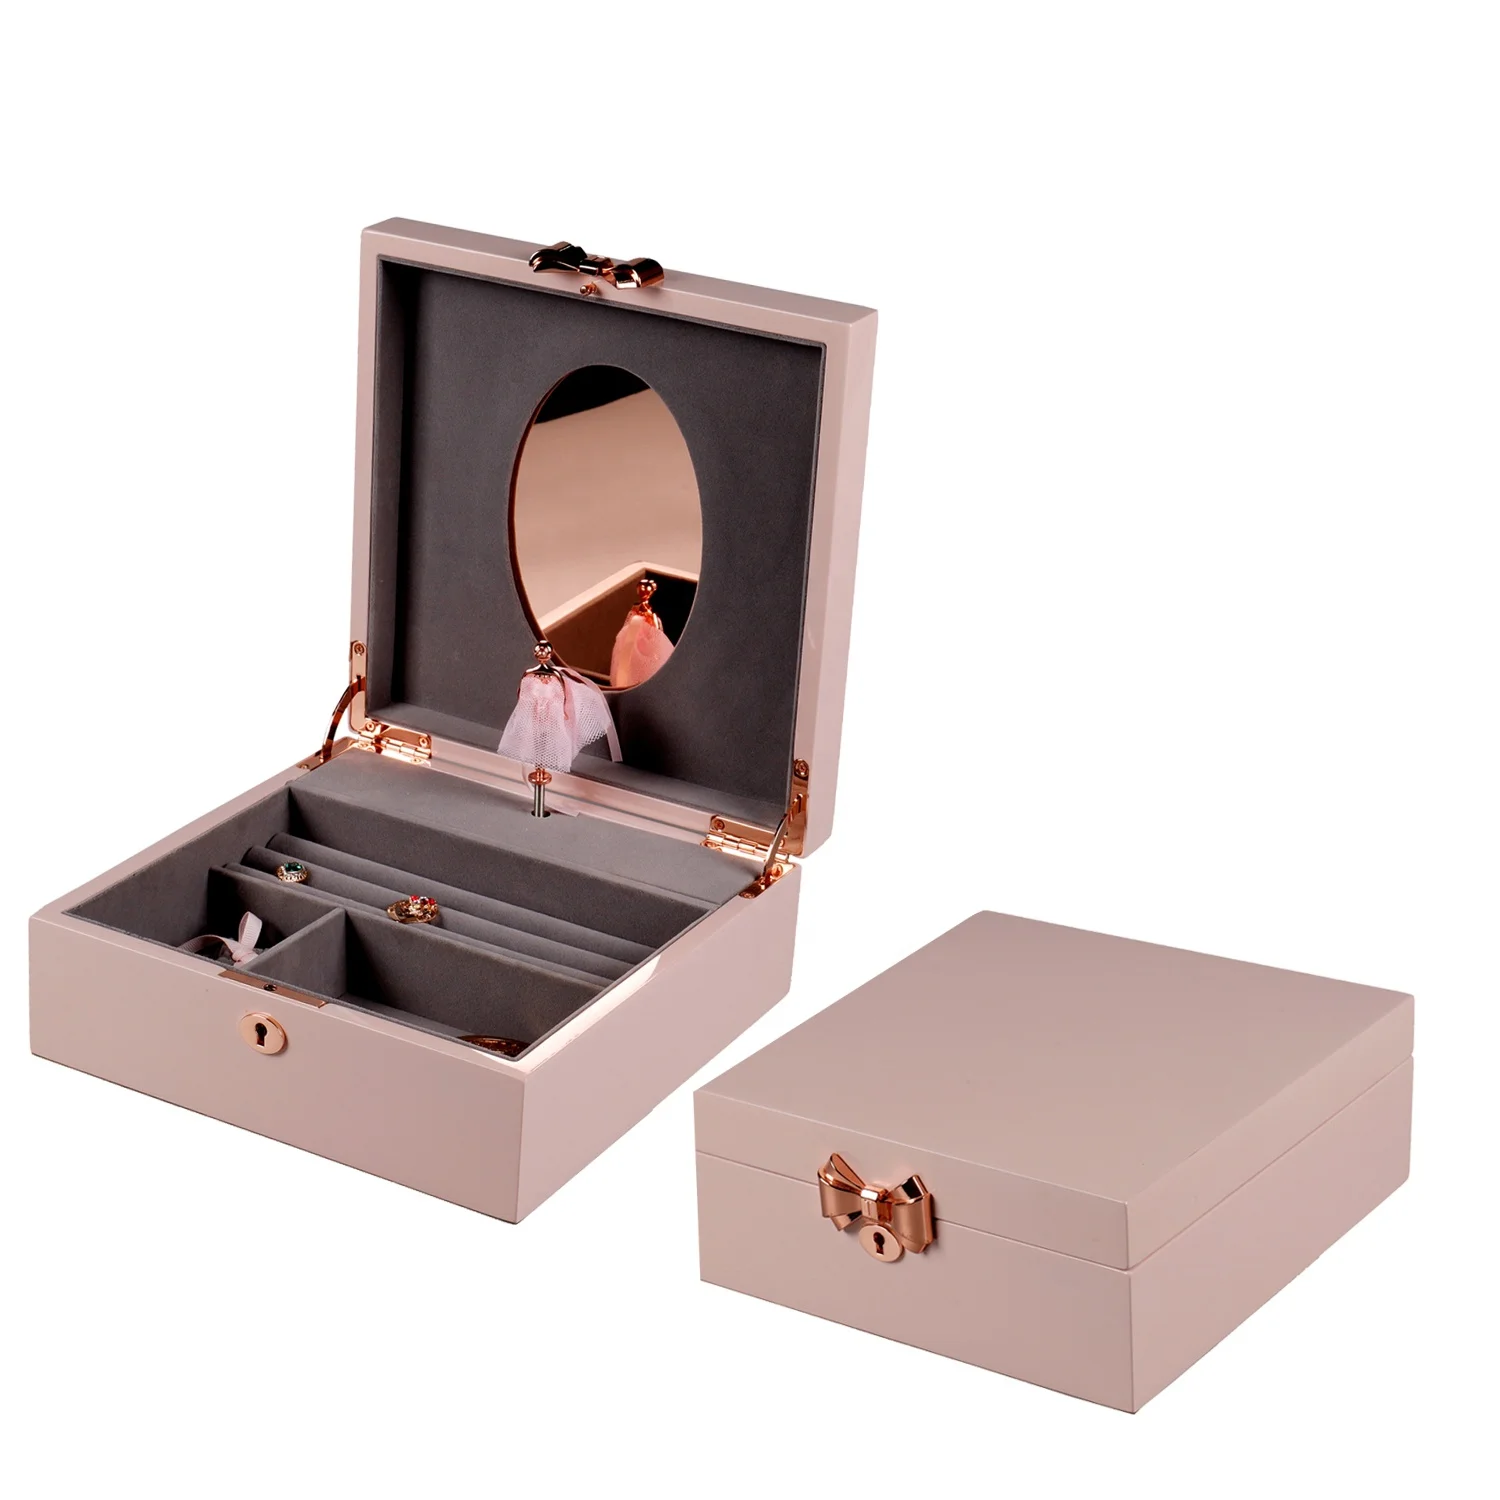 Deluxe Ring Gift Box and Display Box Wood Grain HIgh Gloss Lacquer Finish-NEW 